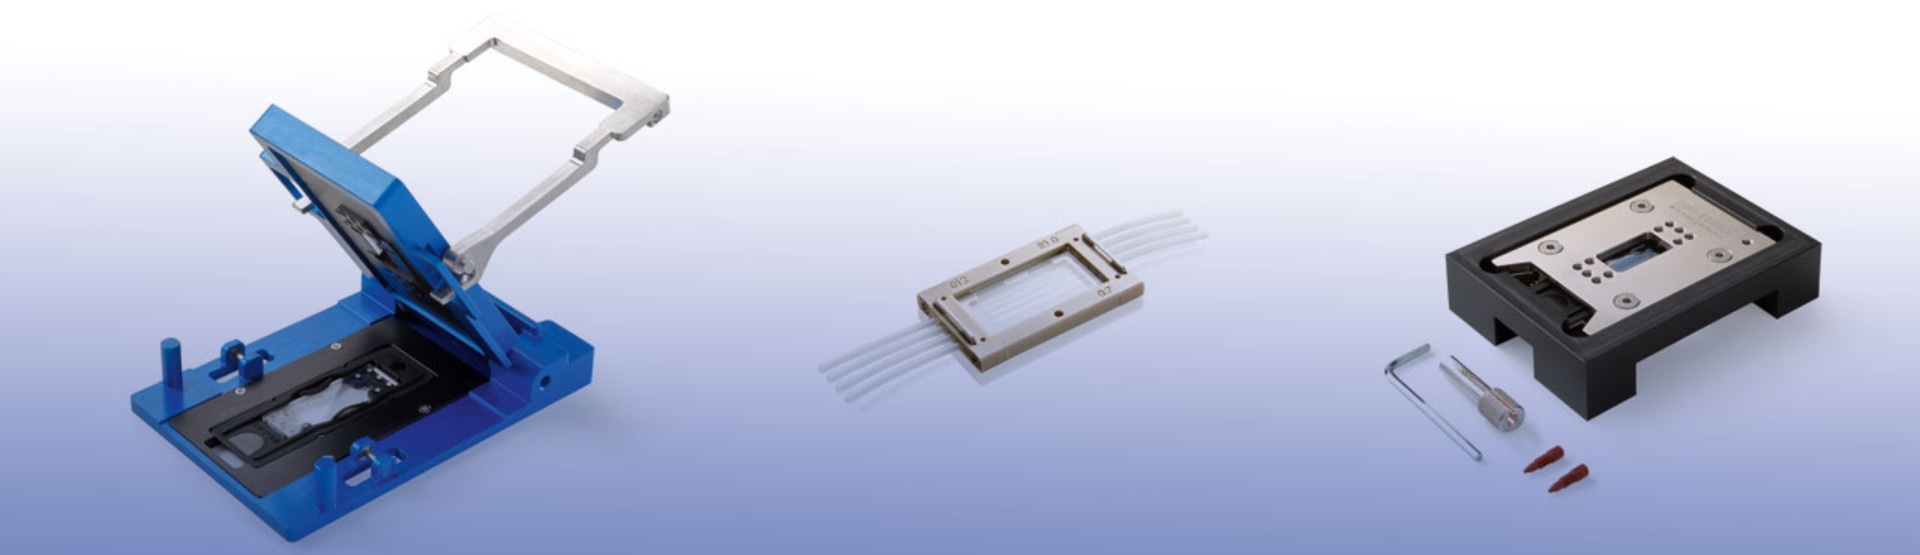 Overview of Micronit's chip holders available in the web store